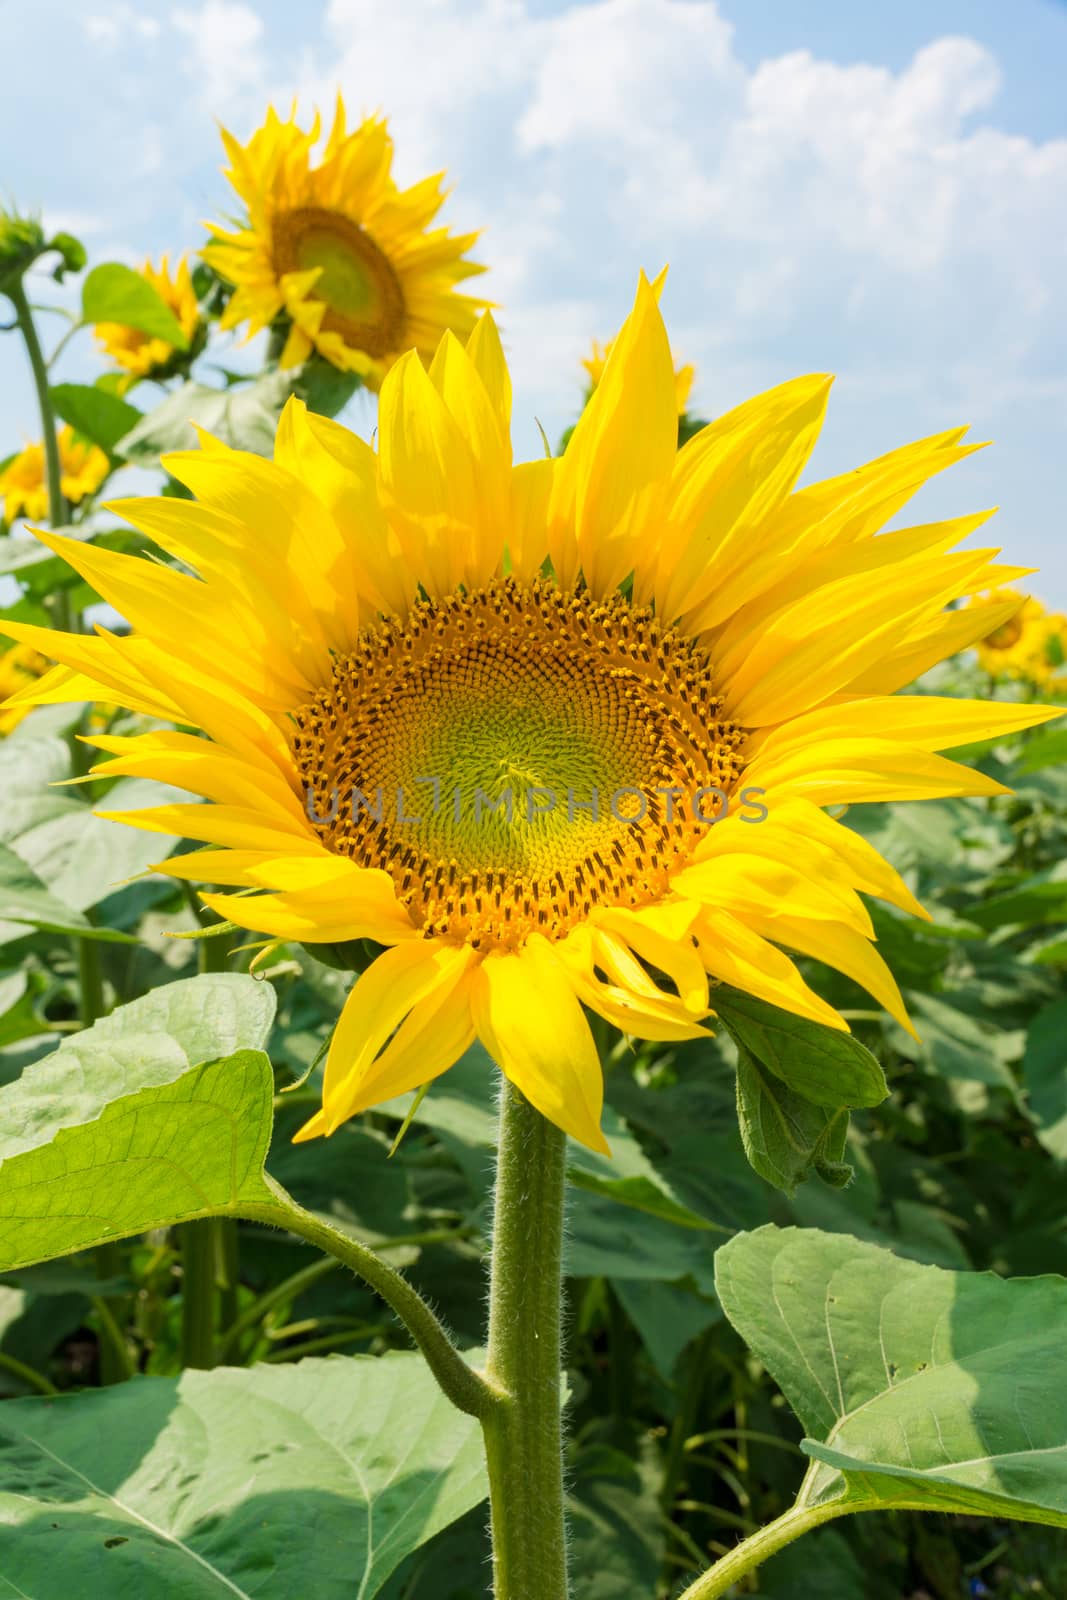 The photo shows blooming sunflowers in the field